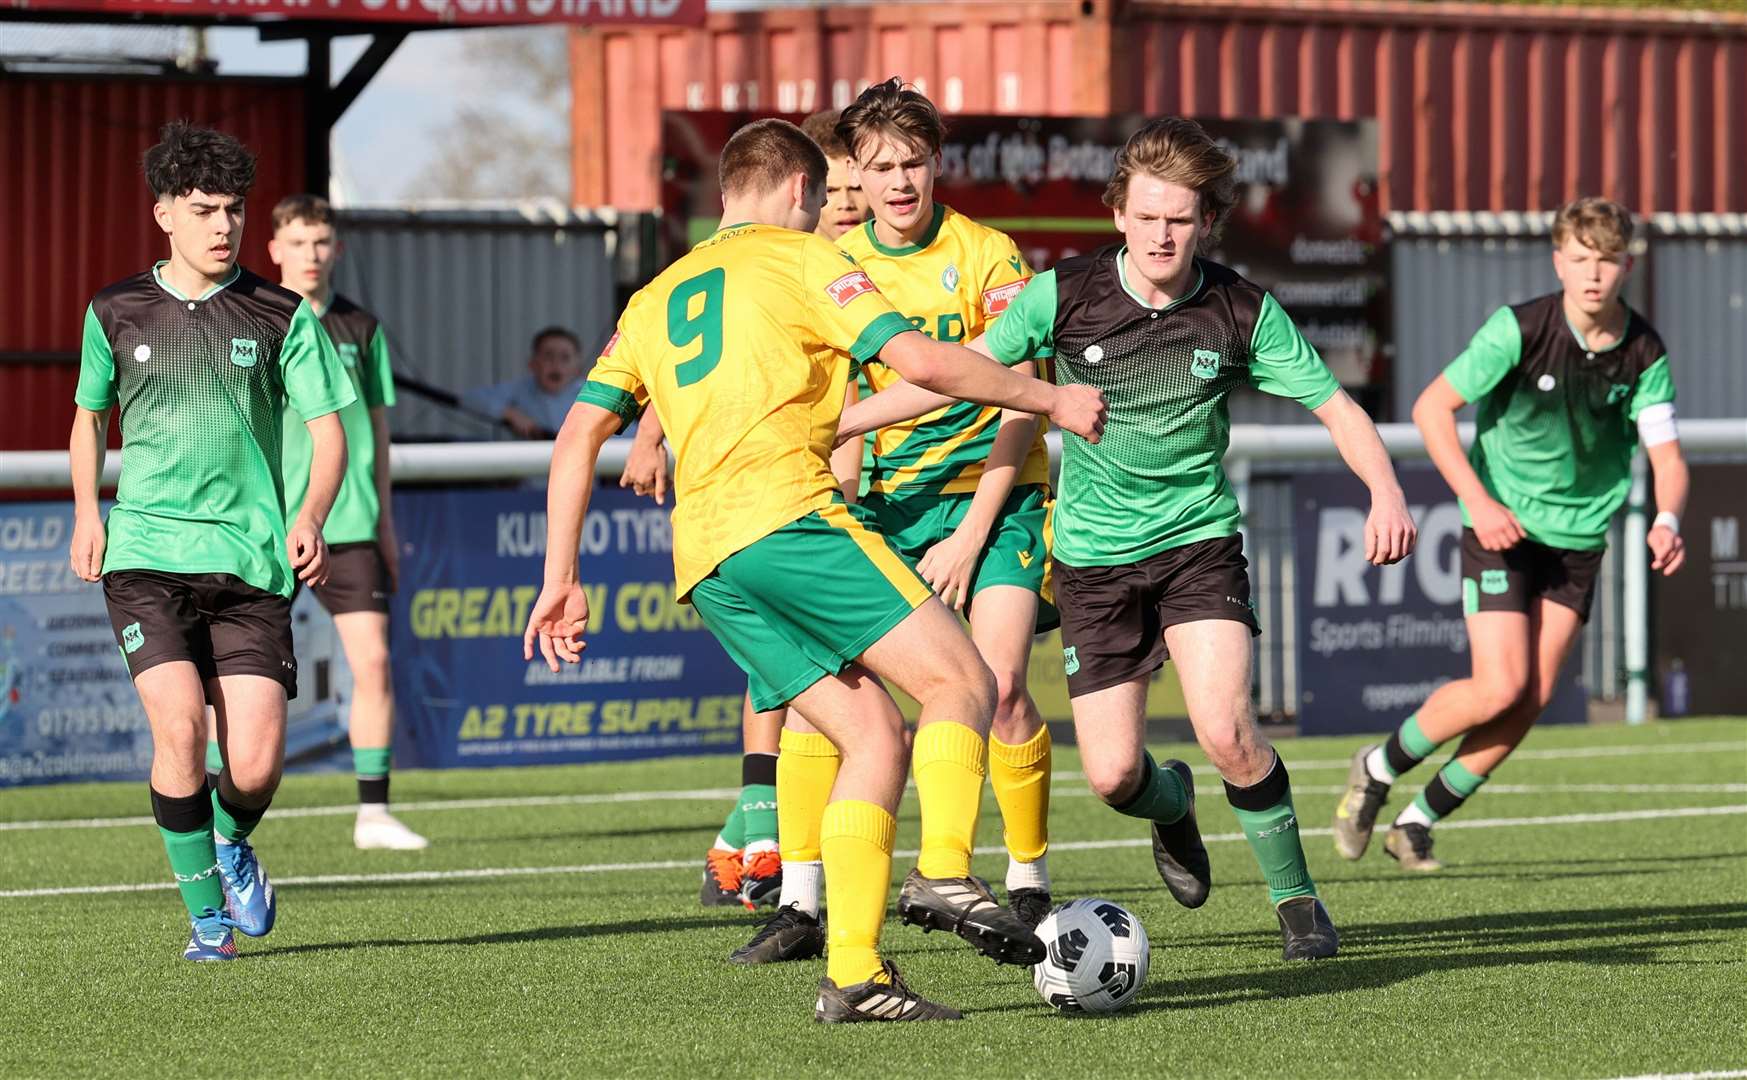 Oscar Kendrick of Ashford United under-15s looks to find a way to goal against Greenway Aces. Picture: PSP Images